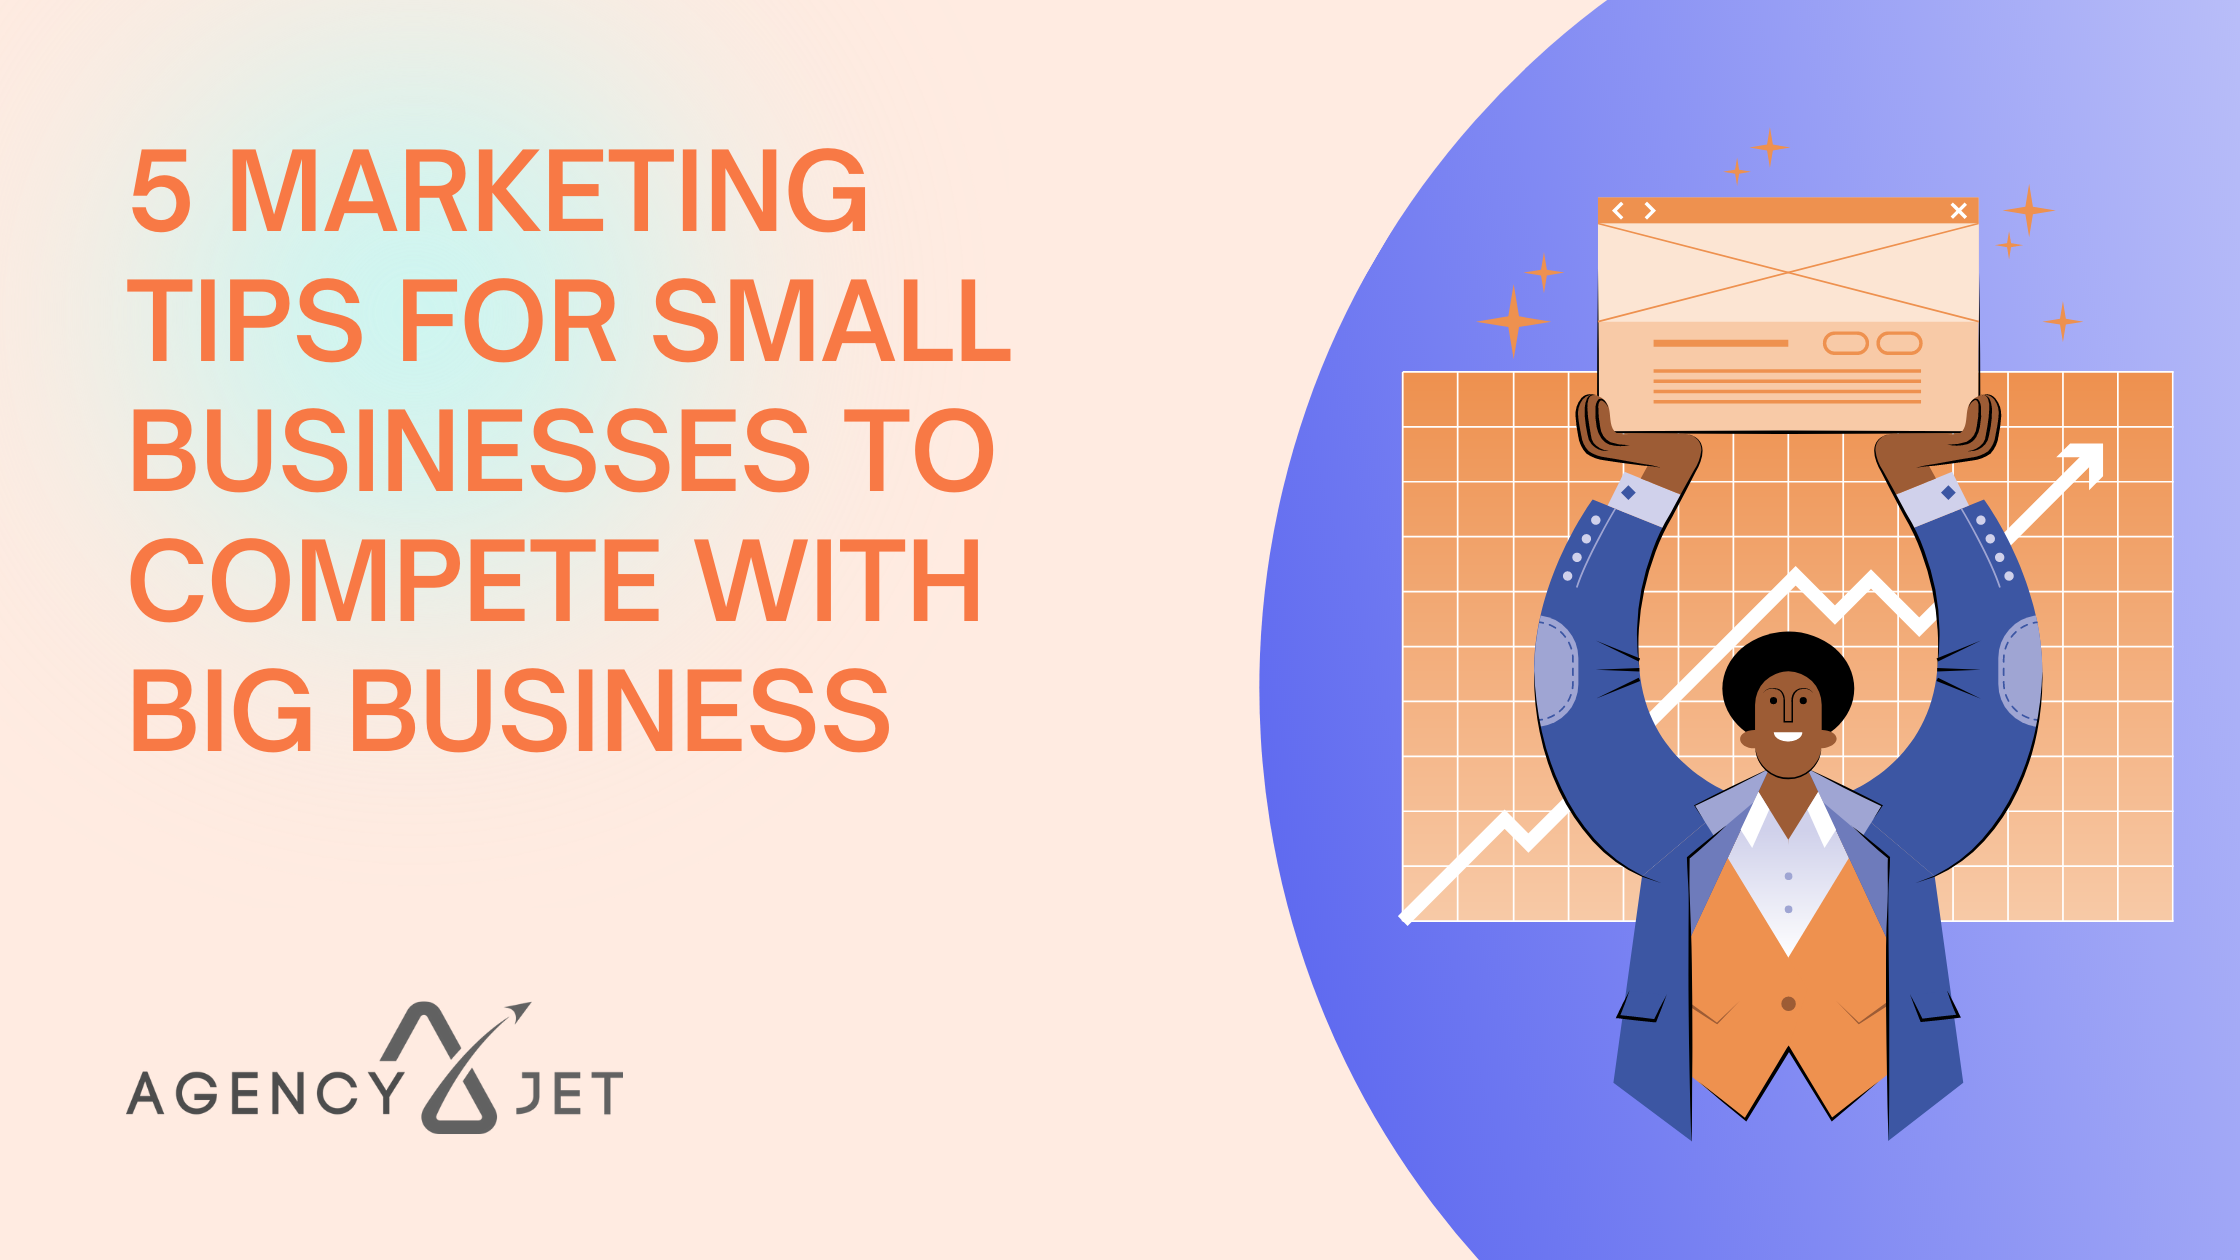 5 Marketing Tips for Small Businesses to Compete with Big Business - Agency Jet